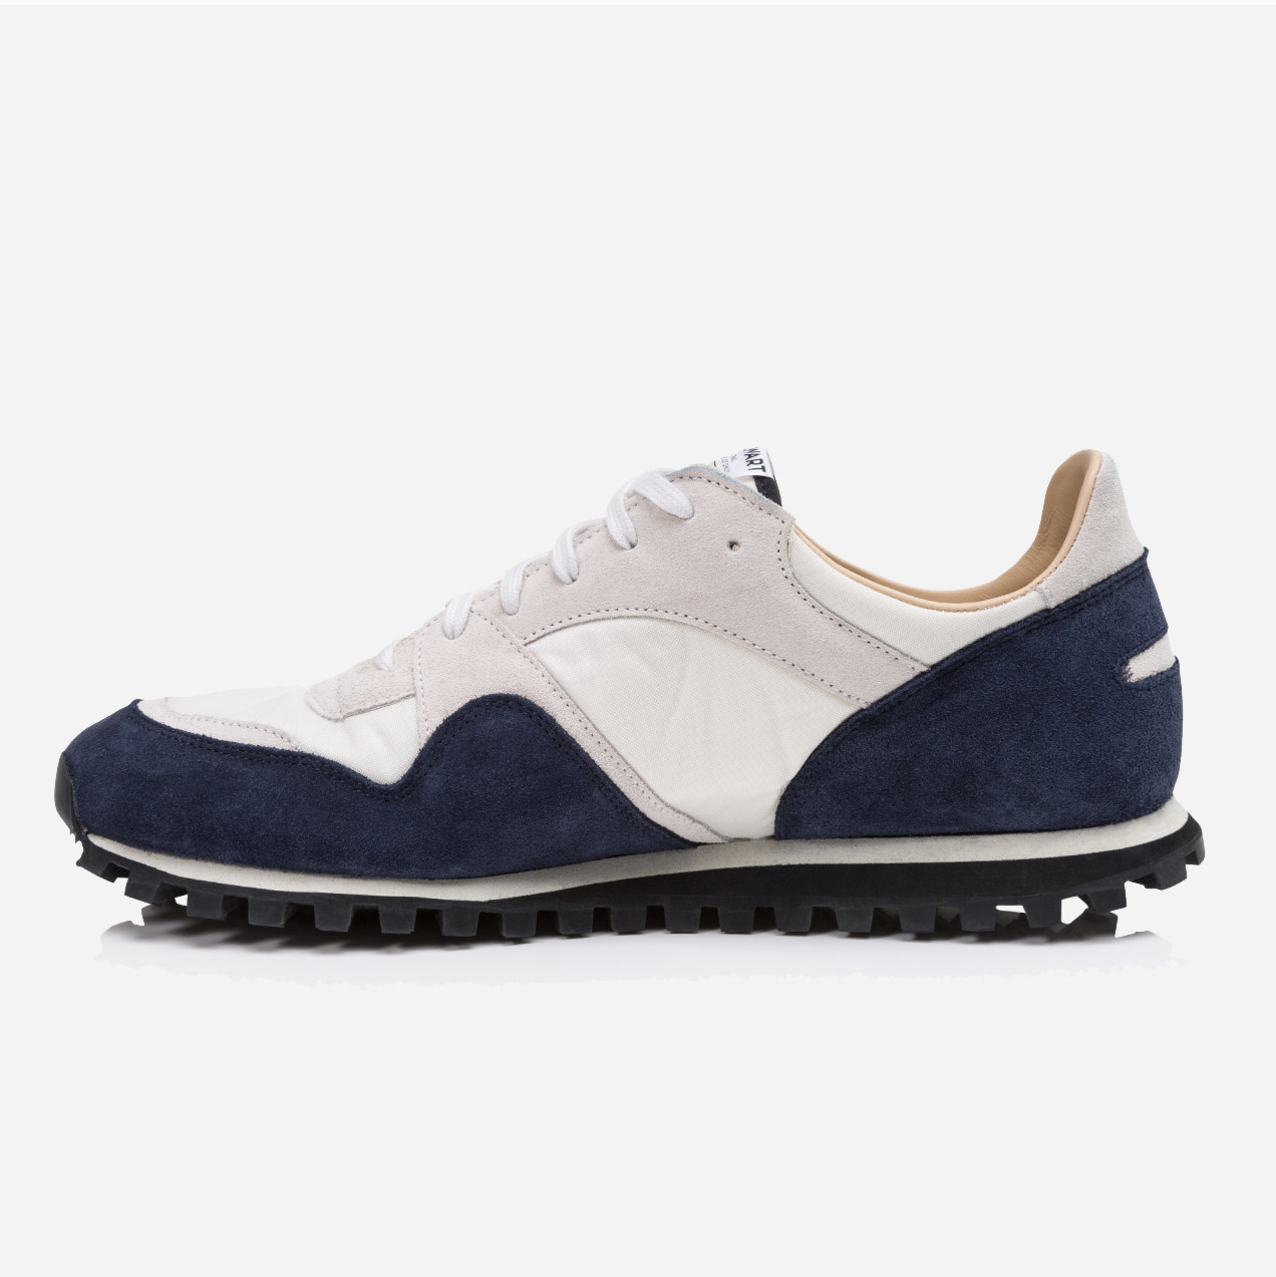 Ten Great Sneakers for Spring – Put This On